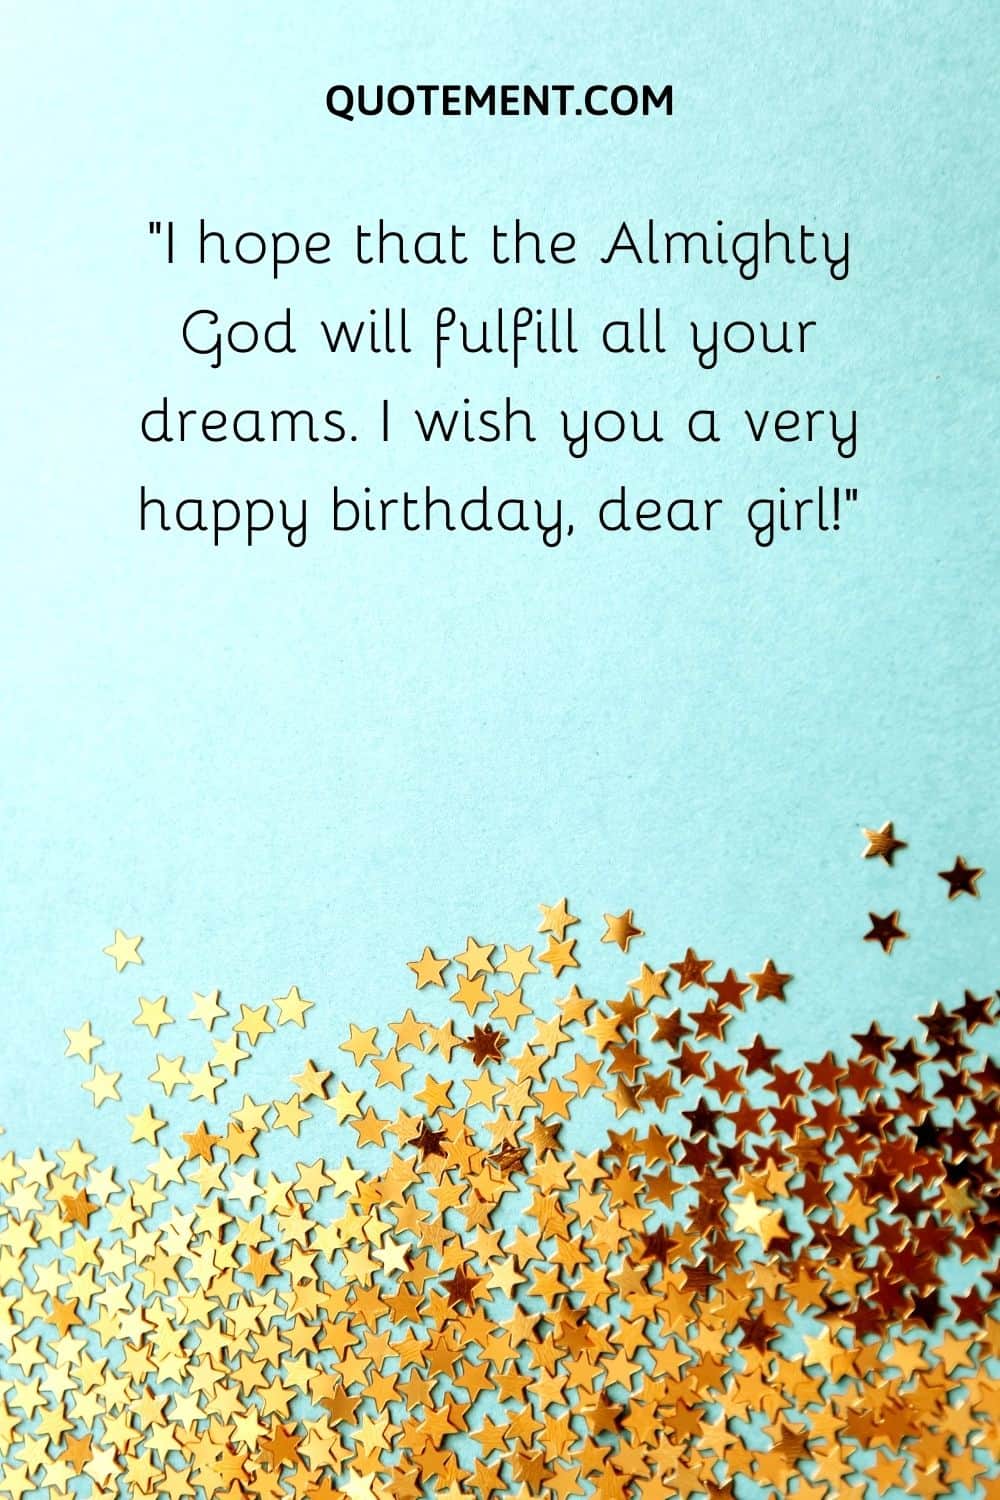 I hope that the Almighty God will fulfill all your dreams. I wish you a very happy birthday, dear girl!